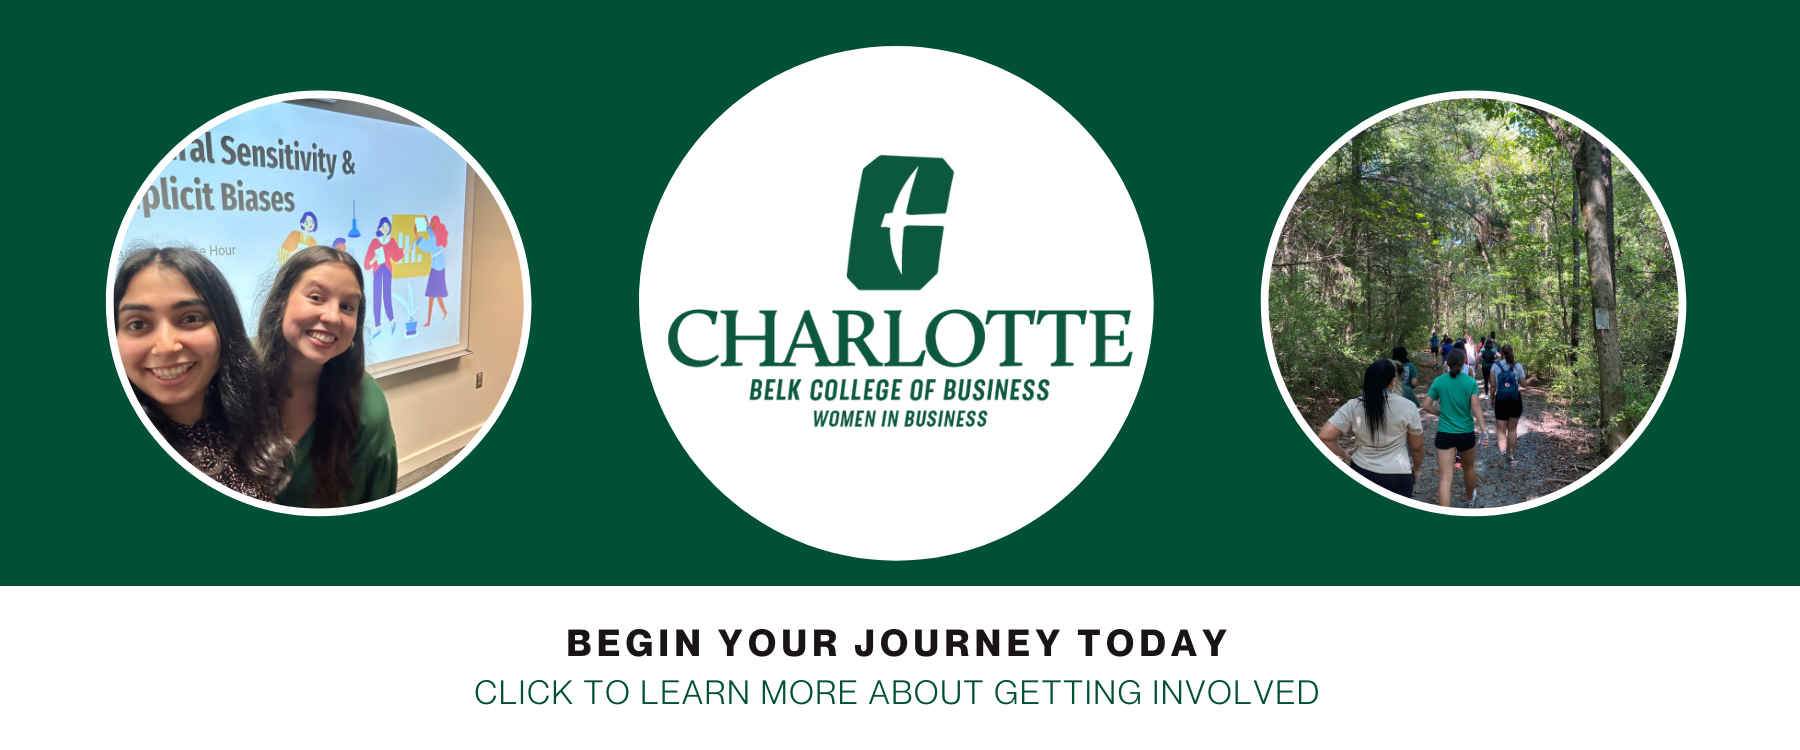 Begin your journey today! Click to learn more about getting involved.